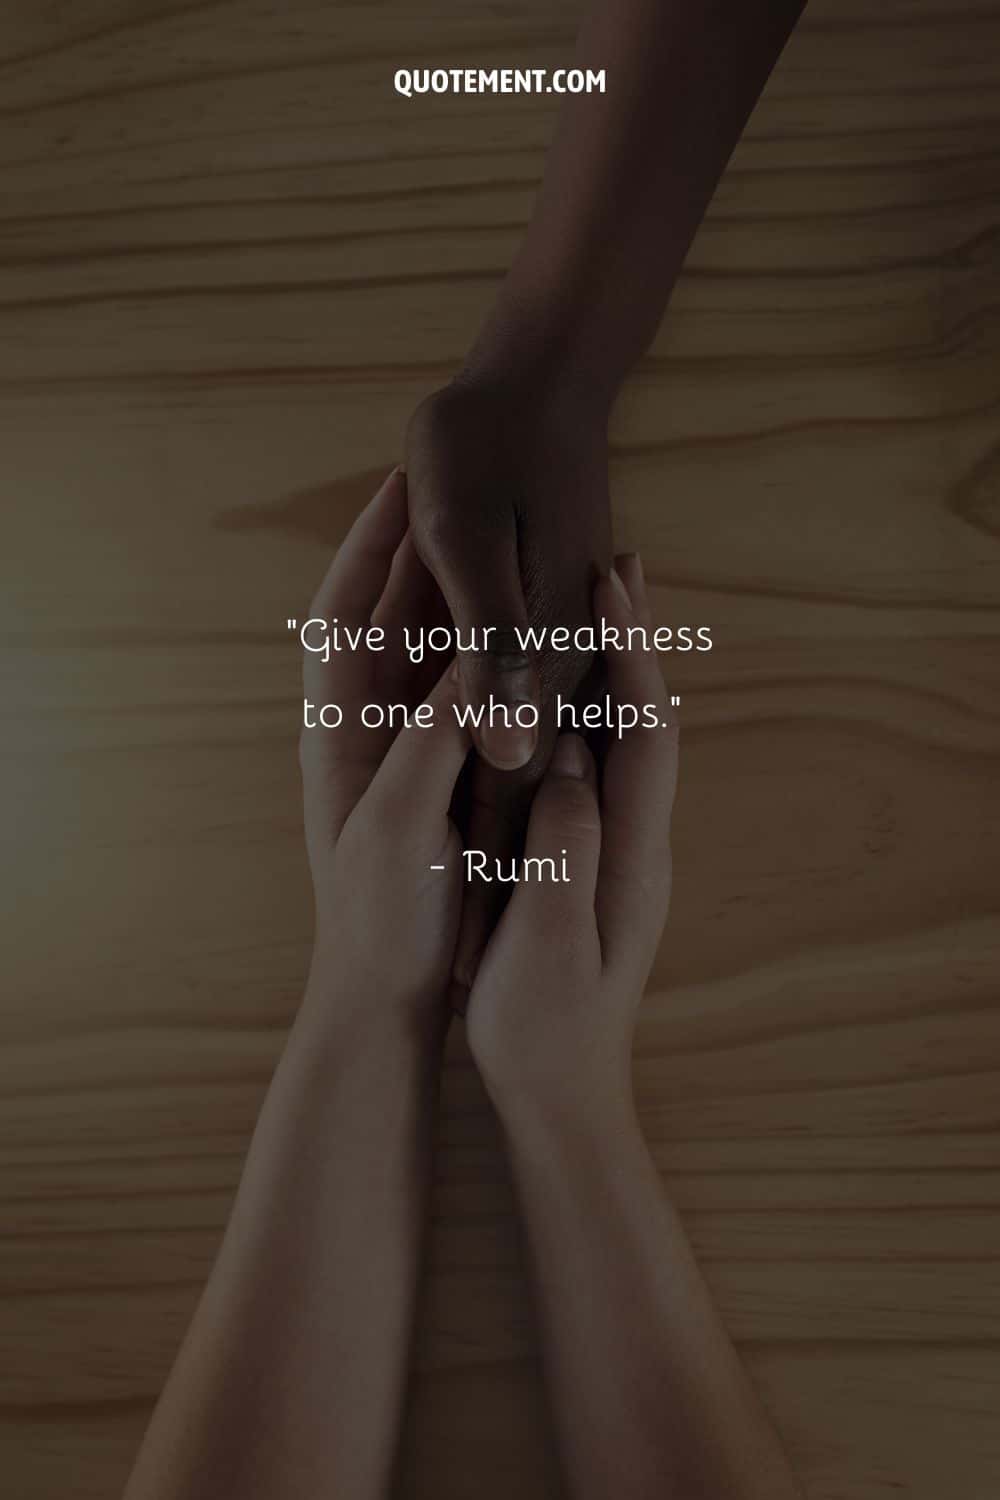 Give your weakness to one who helps.